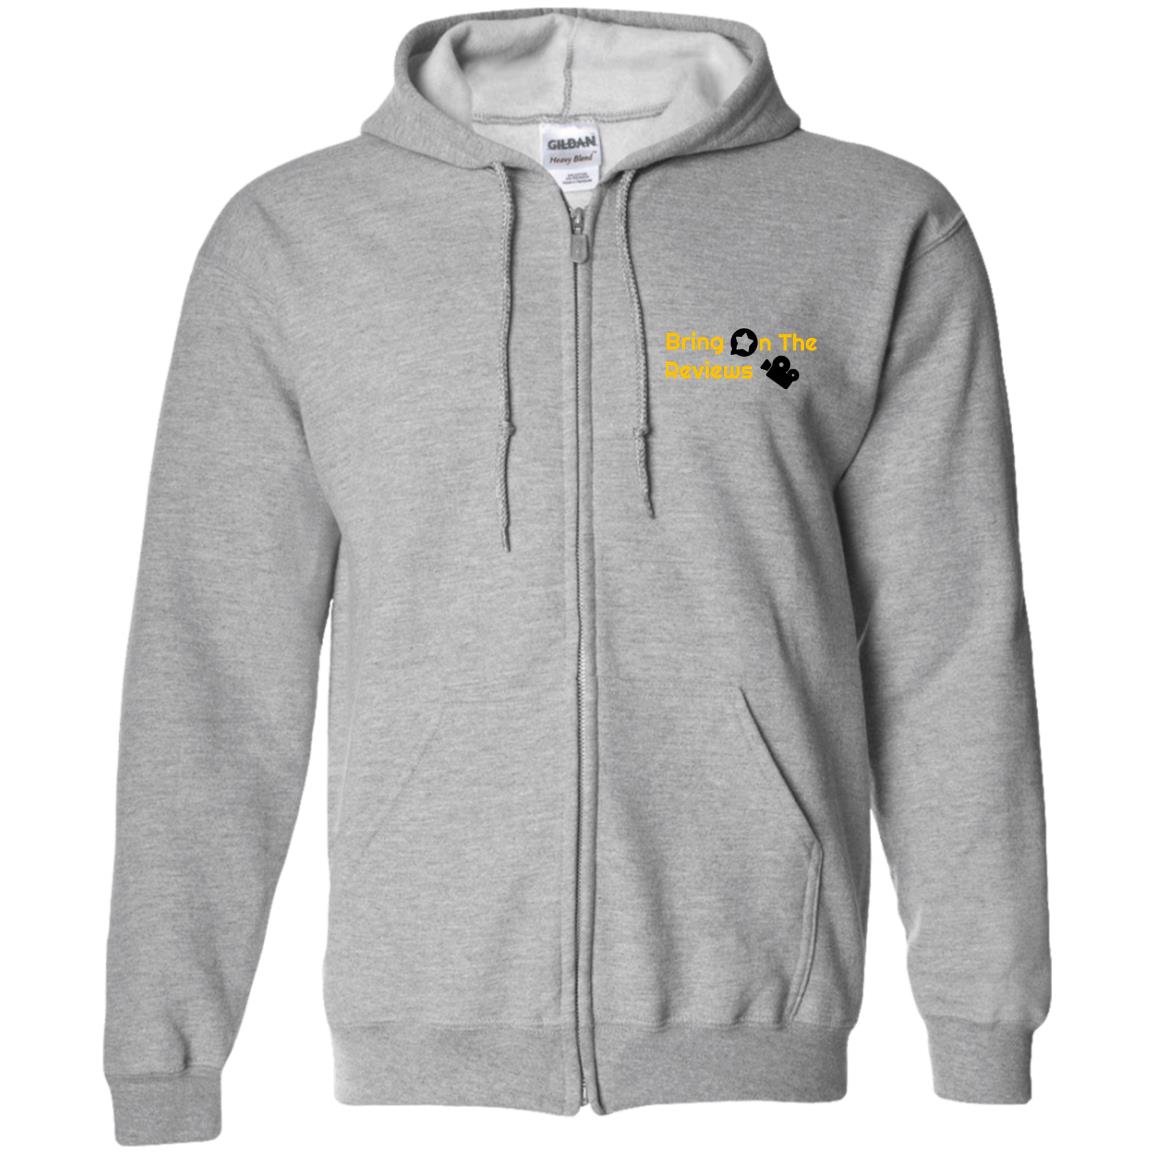 Classic Hoodie 1 - Bring On The Reviews